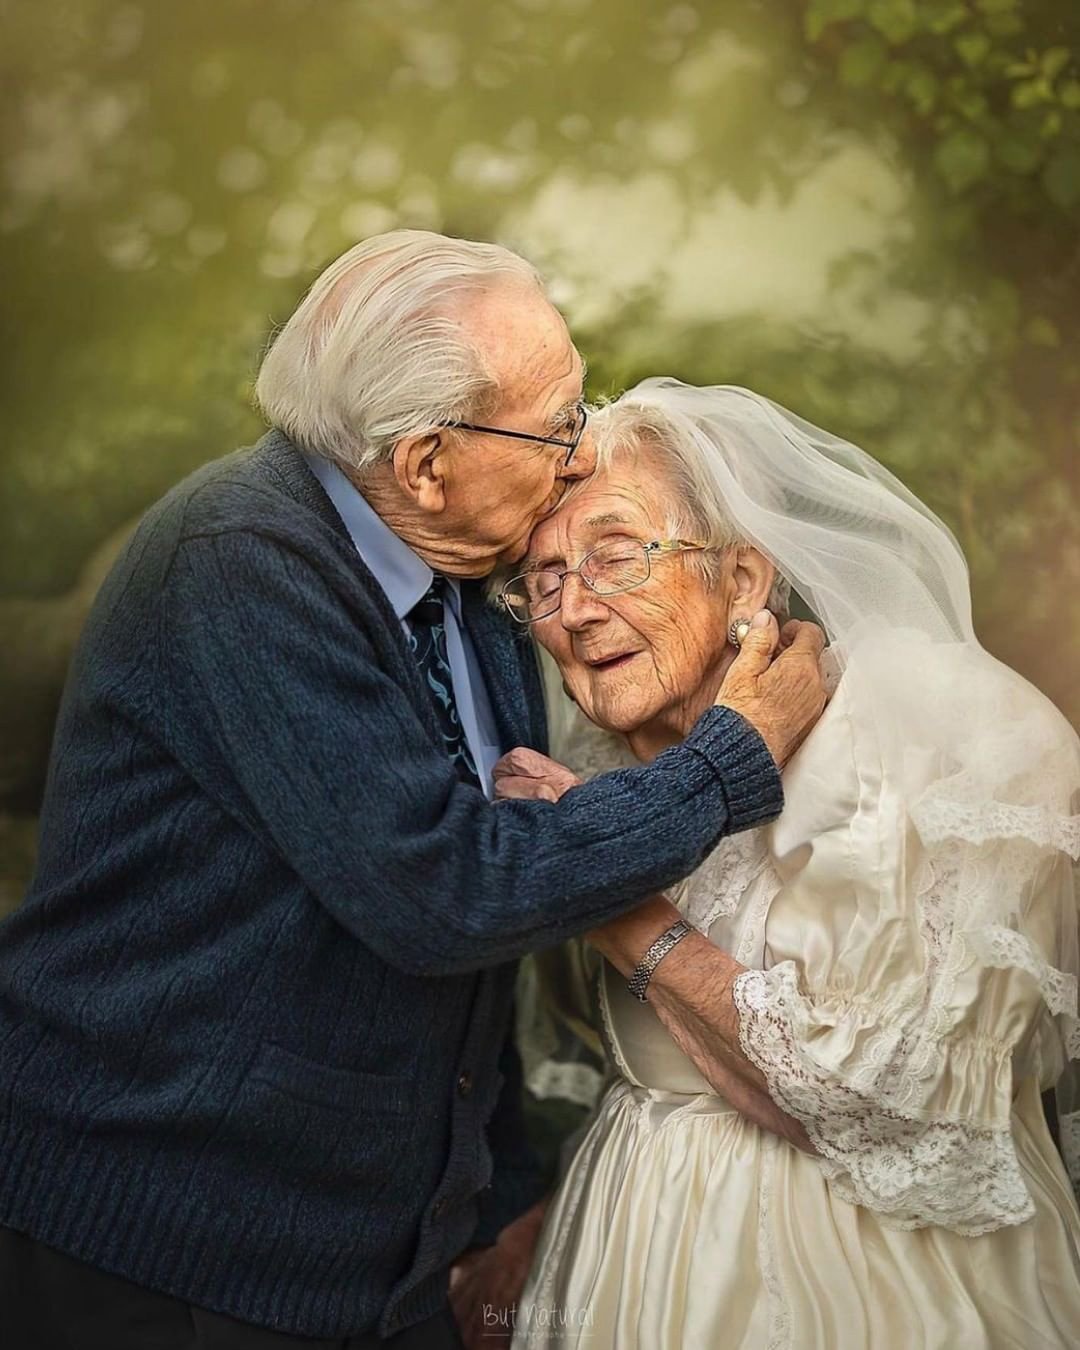 popular instagram posts 2020 from 68 years old wedding